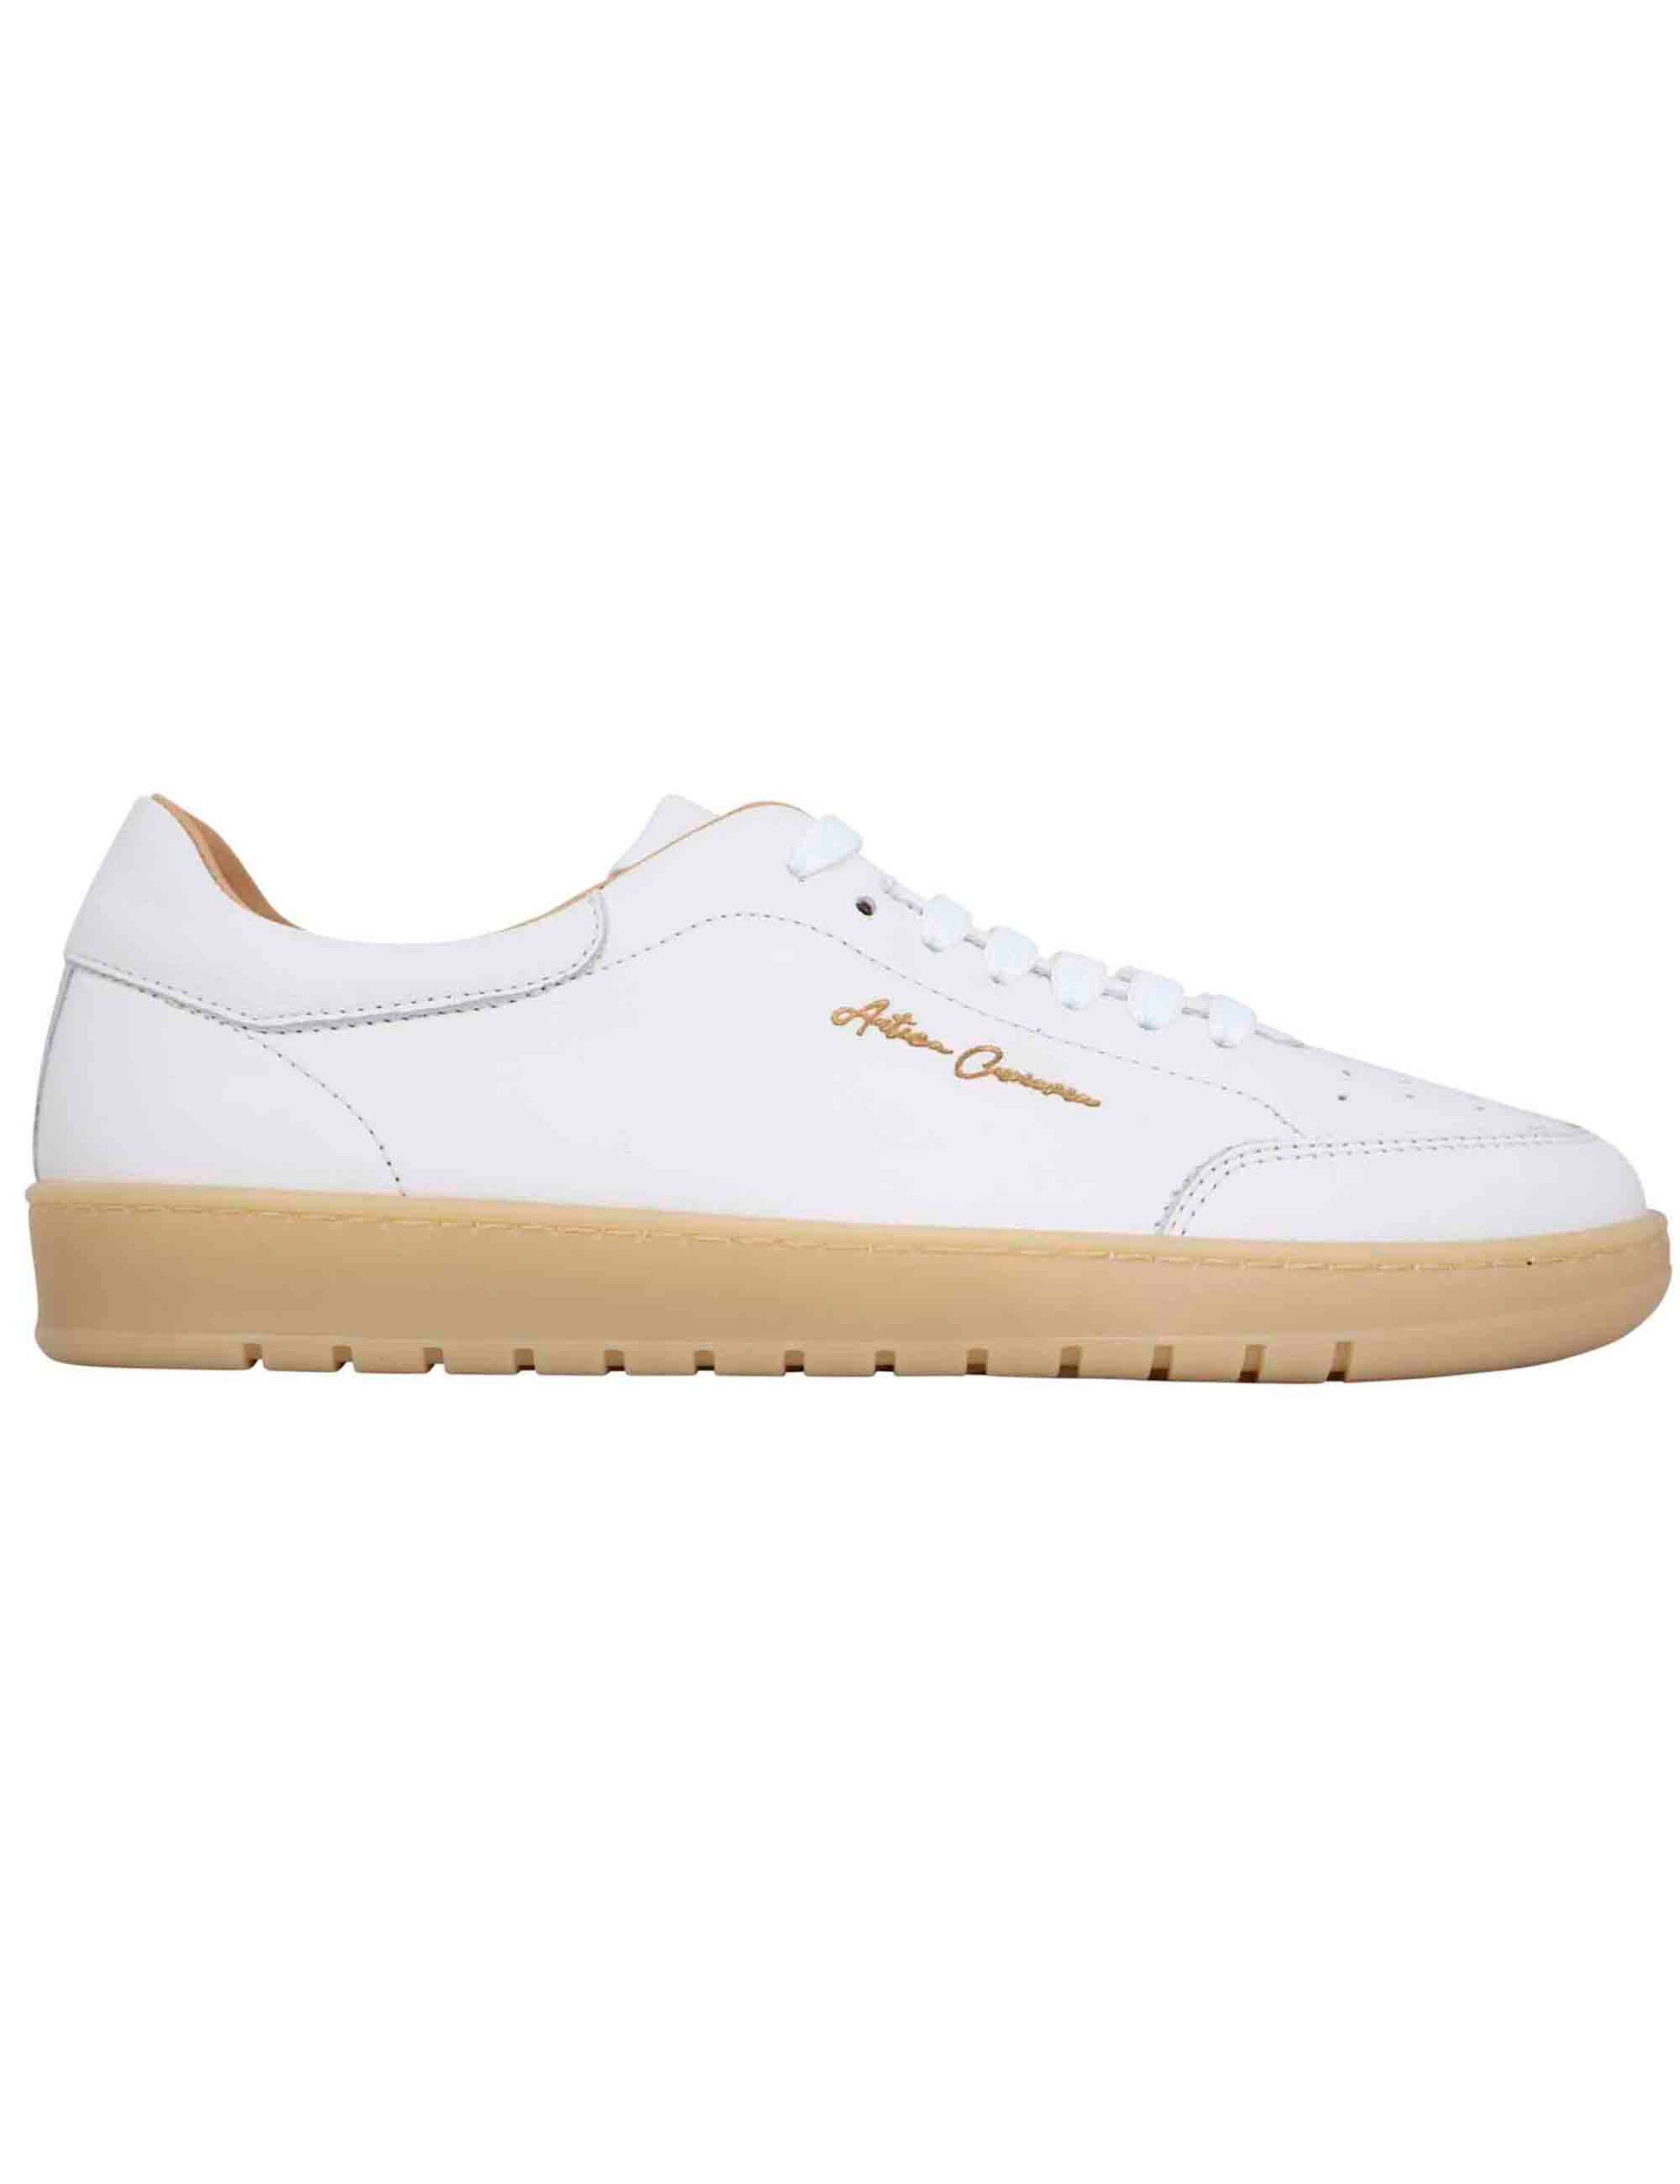 Men's white leather sneakers with amber rubber sole